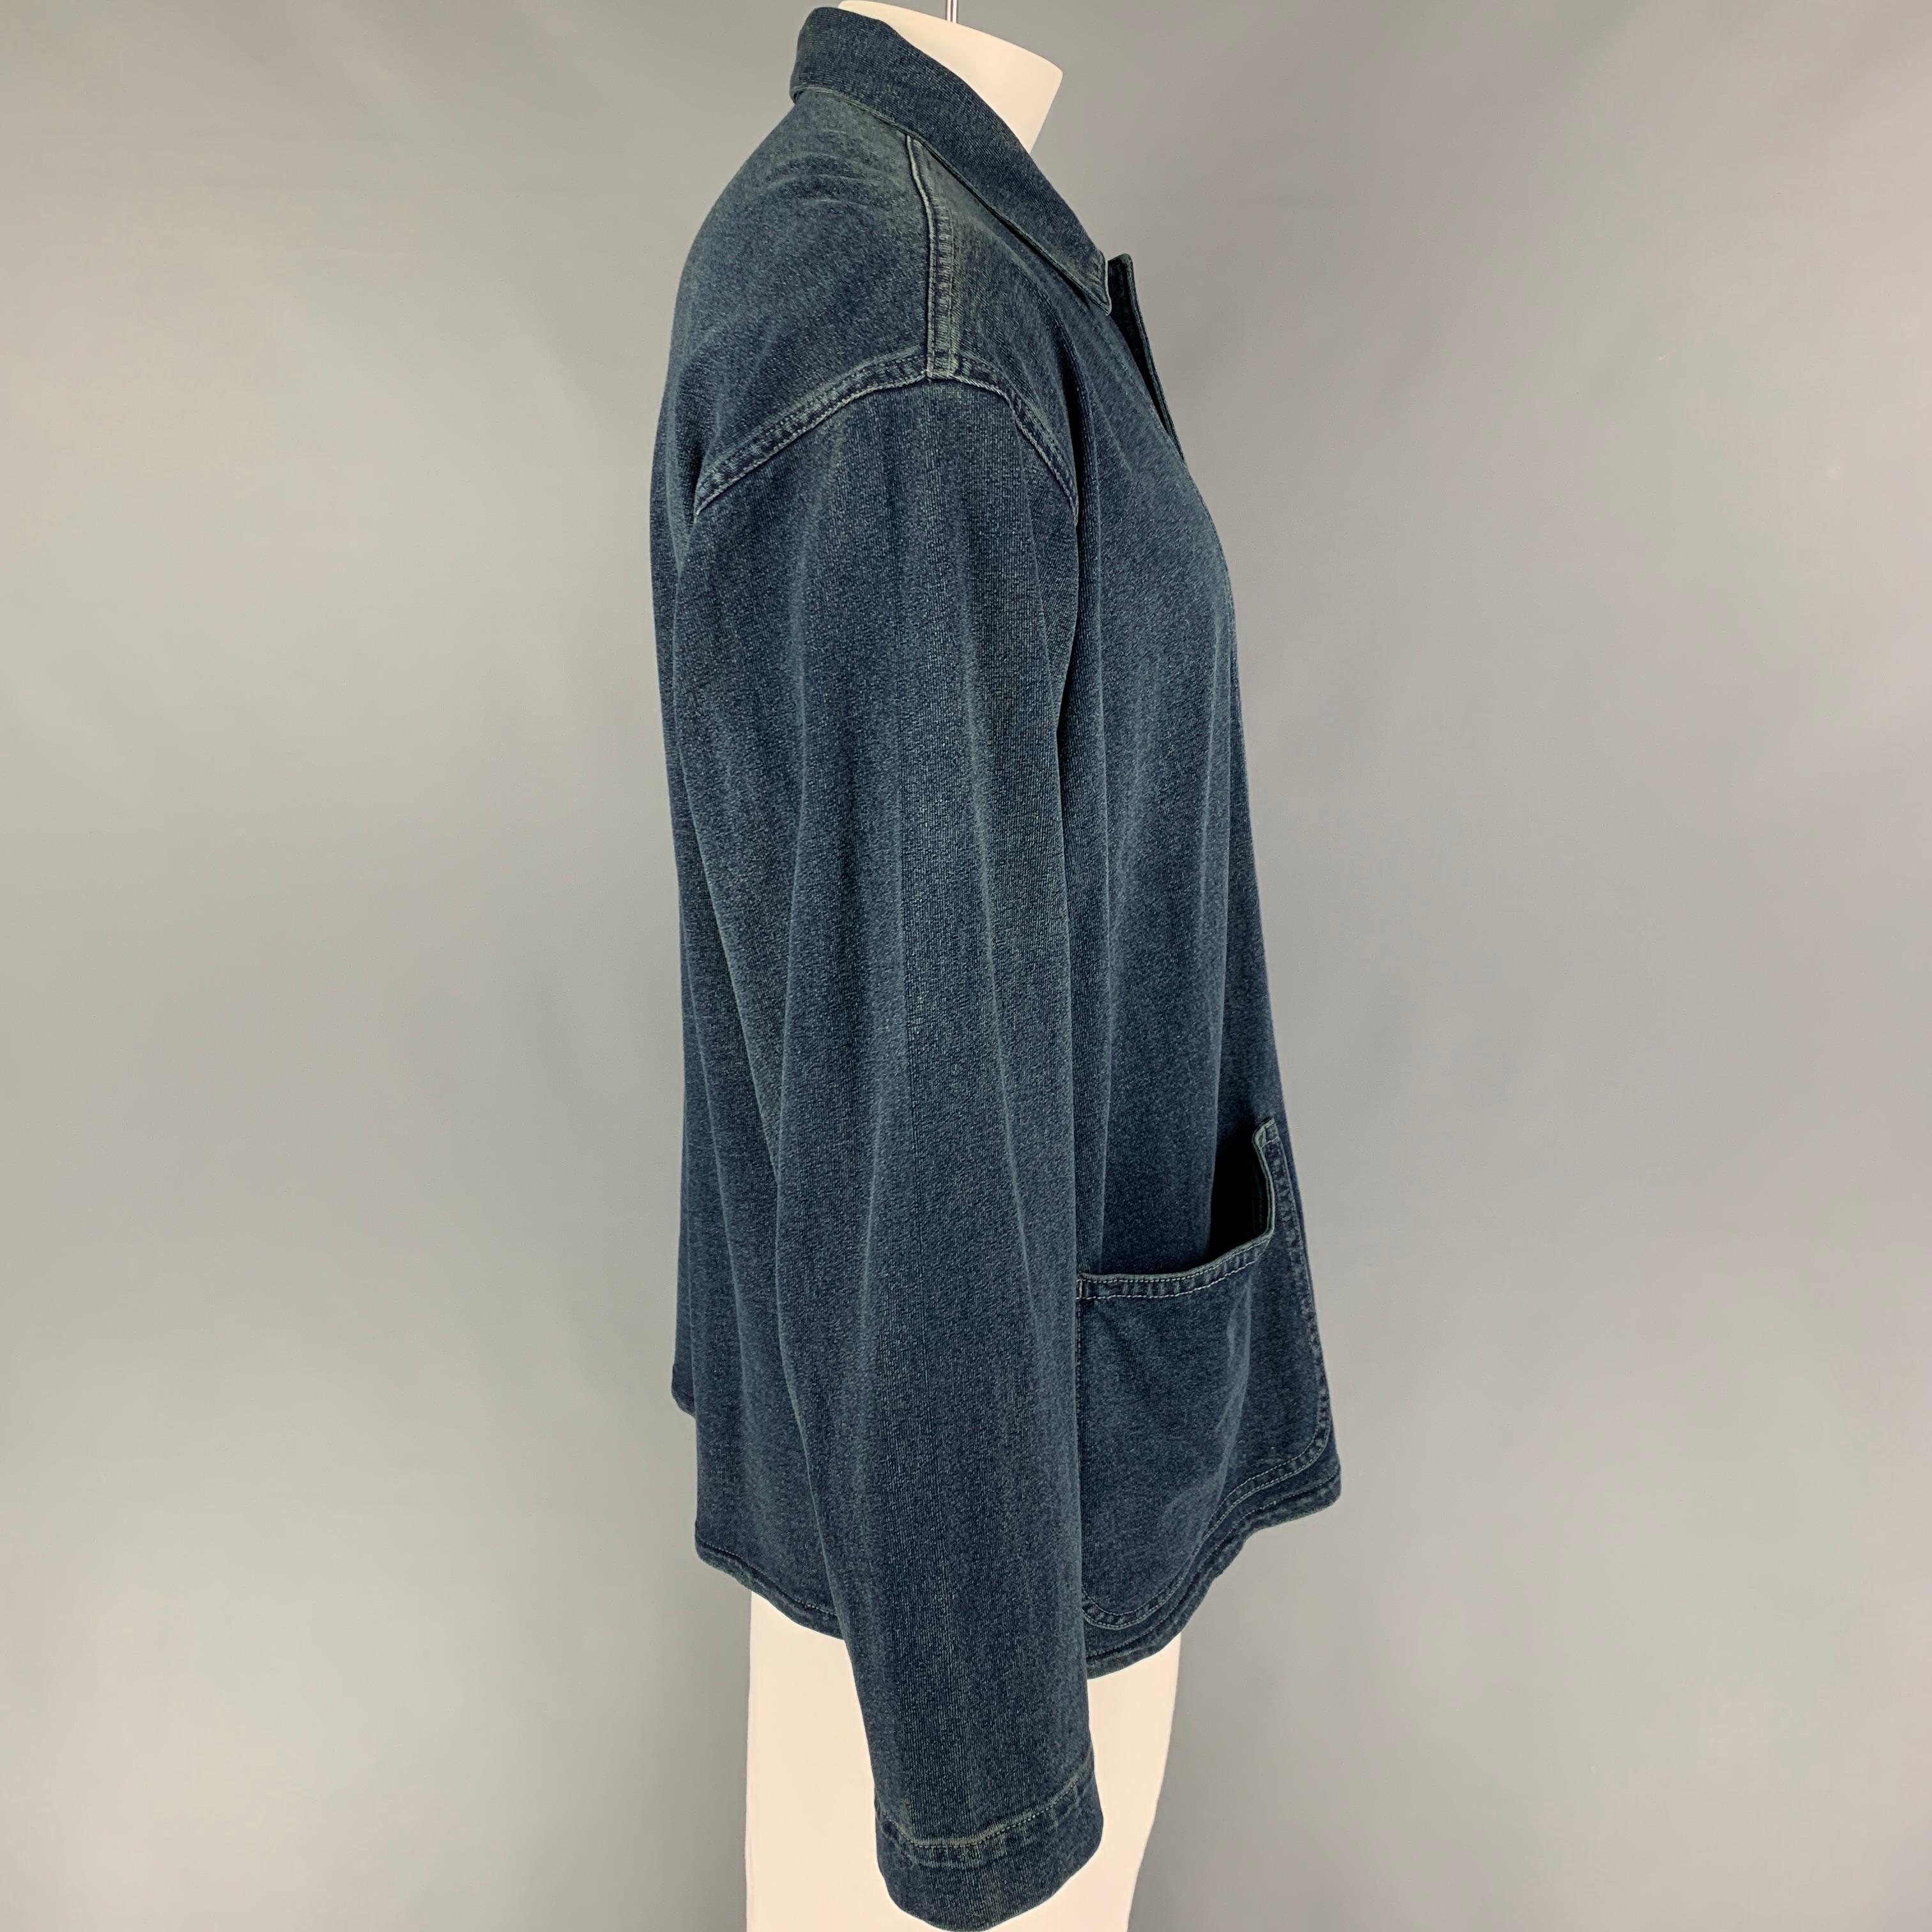 RRL by RALPH LAUREN jacket comes in a dark blue cotton featuring a spread collar, patch pockets, contrast stitching, and a buttoned closure. 

Very Good Pre-Owned Condition.
Marked: XL

Measurements:

Shoulder: 23.5 in.
Chest: 48 in.
Sleeve: 26